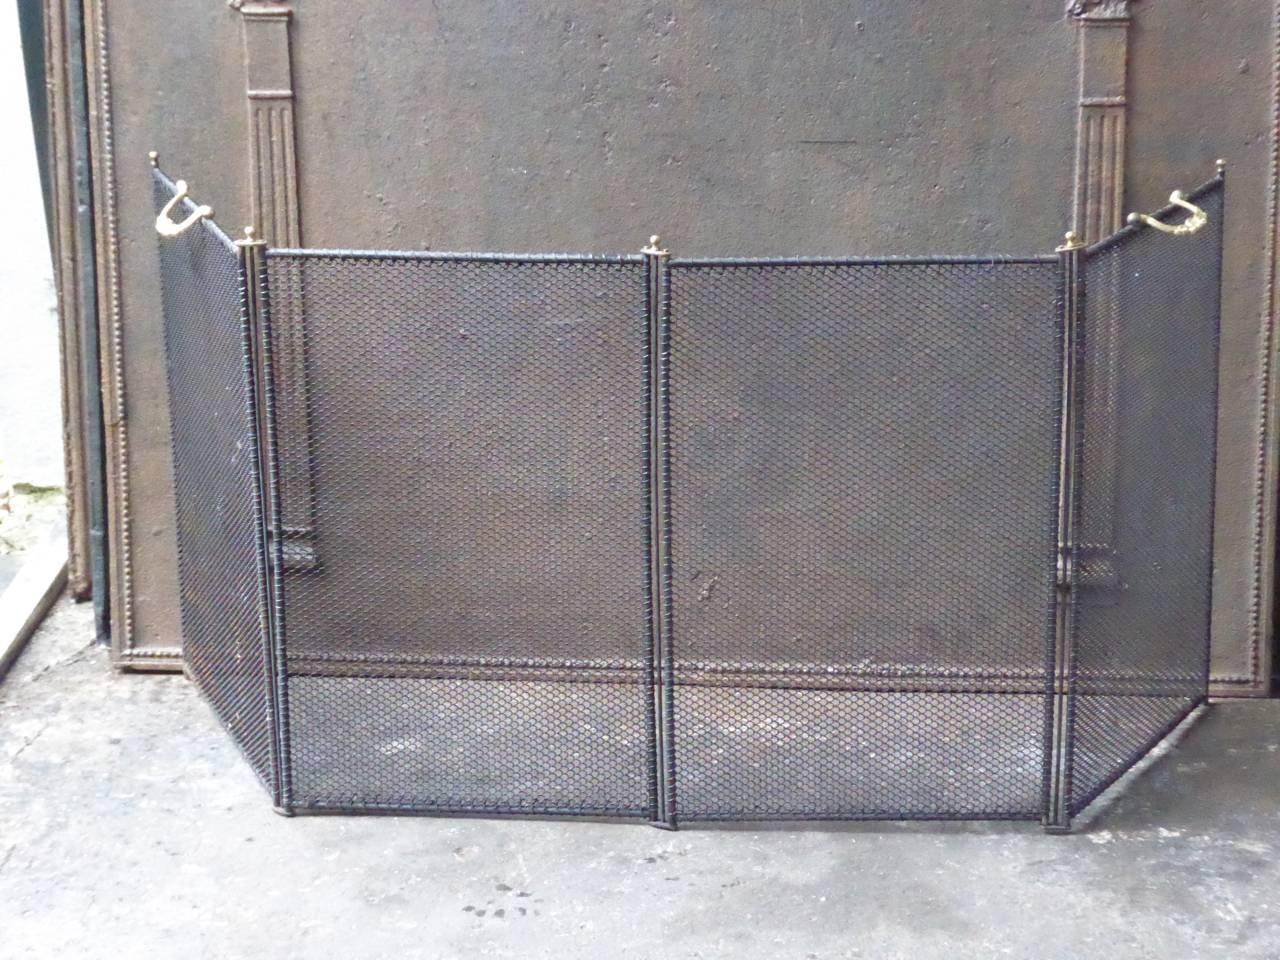 French 19th-20th century fire screen made of wrought iron with iron mesh and brass handles.